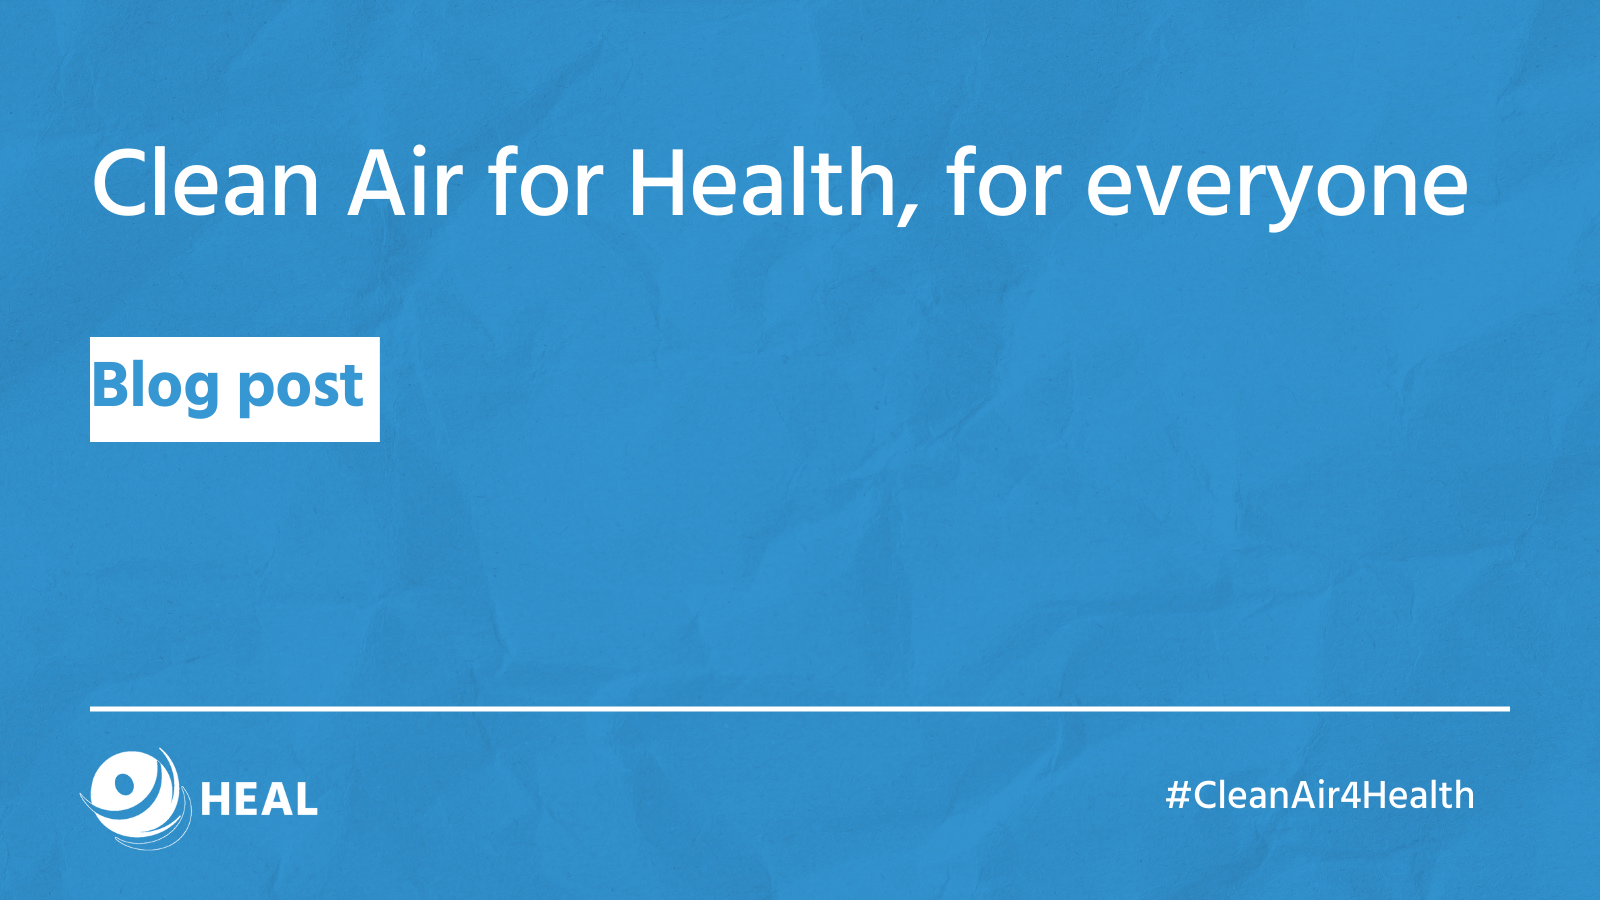 Clean Air for Health, for everyone